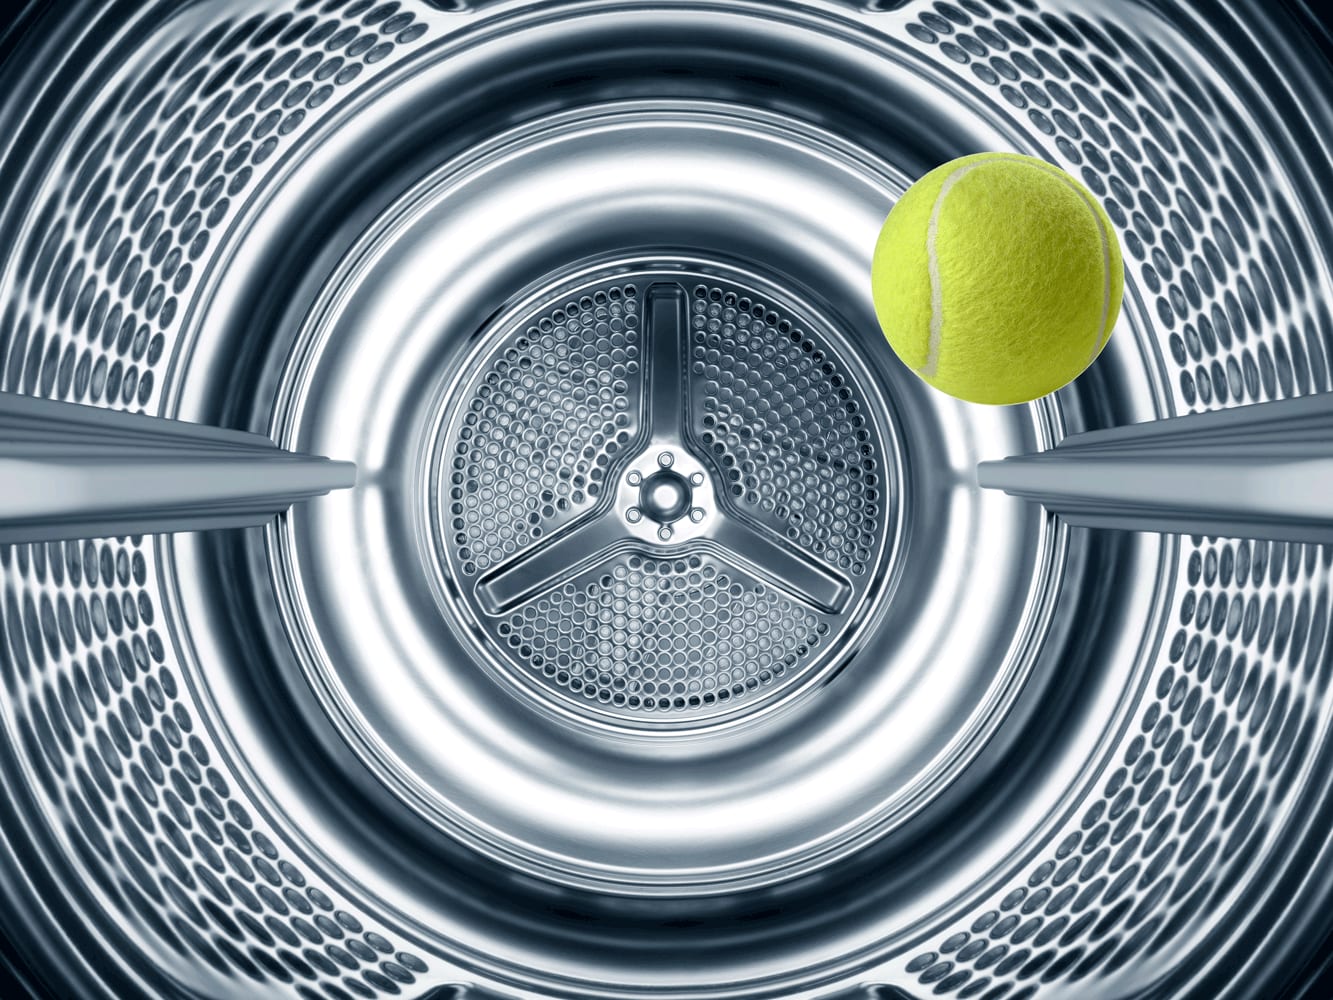 Why You Should Put Tennis Balls in Your Dryer